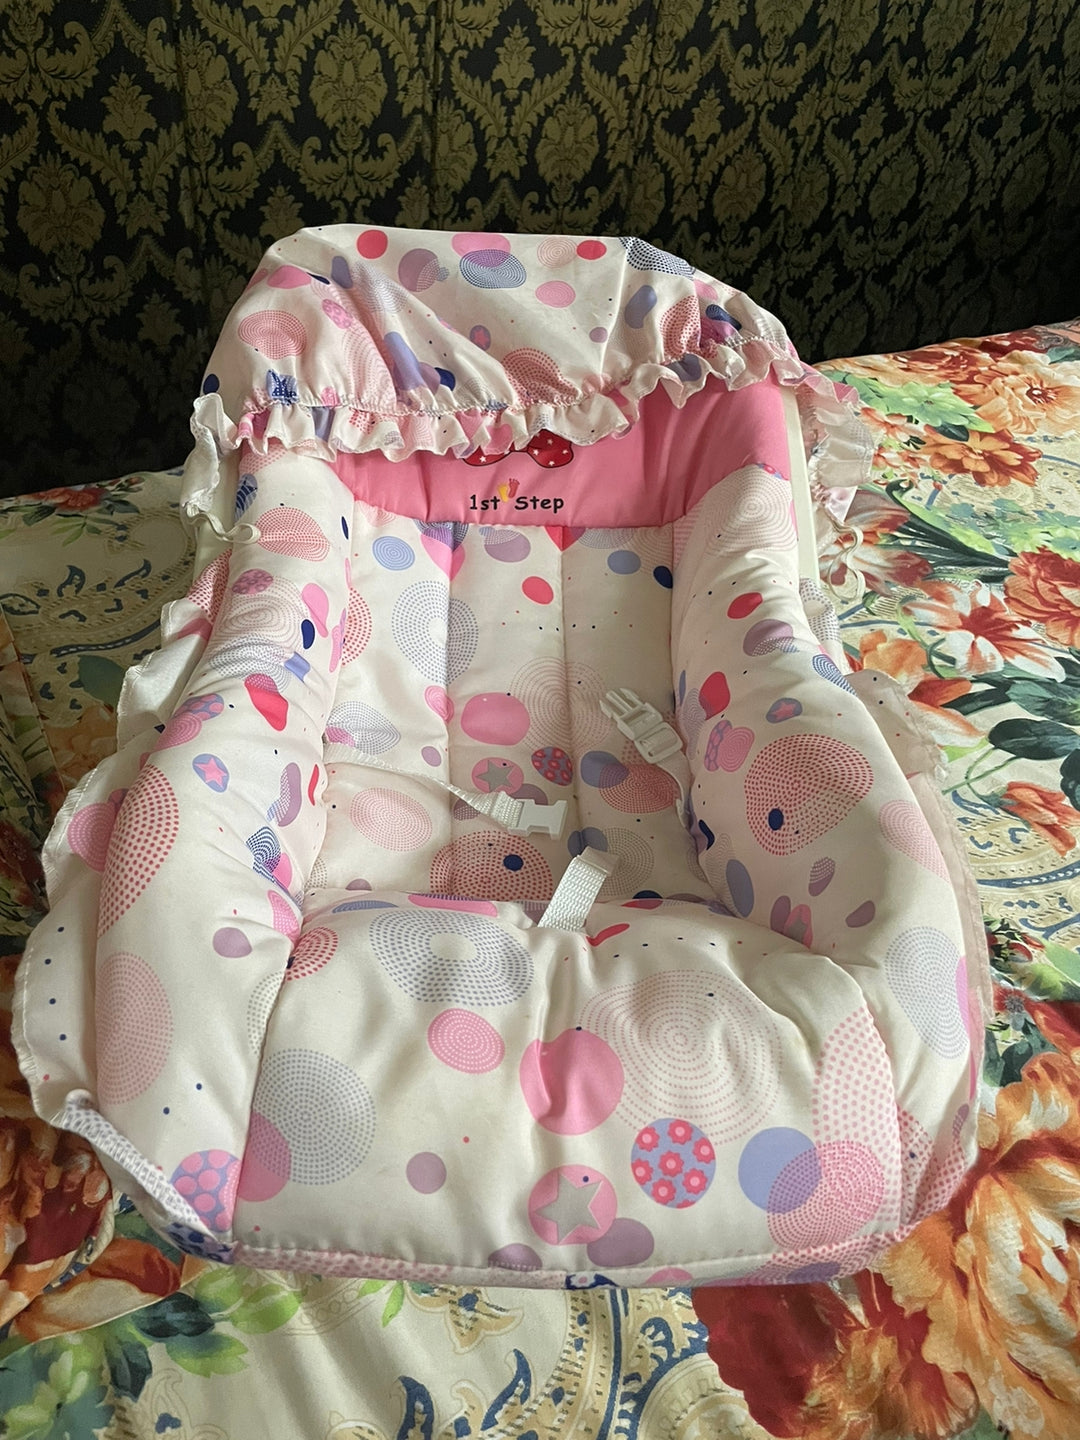 1st Step 5 in 1 Carrycot